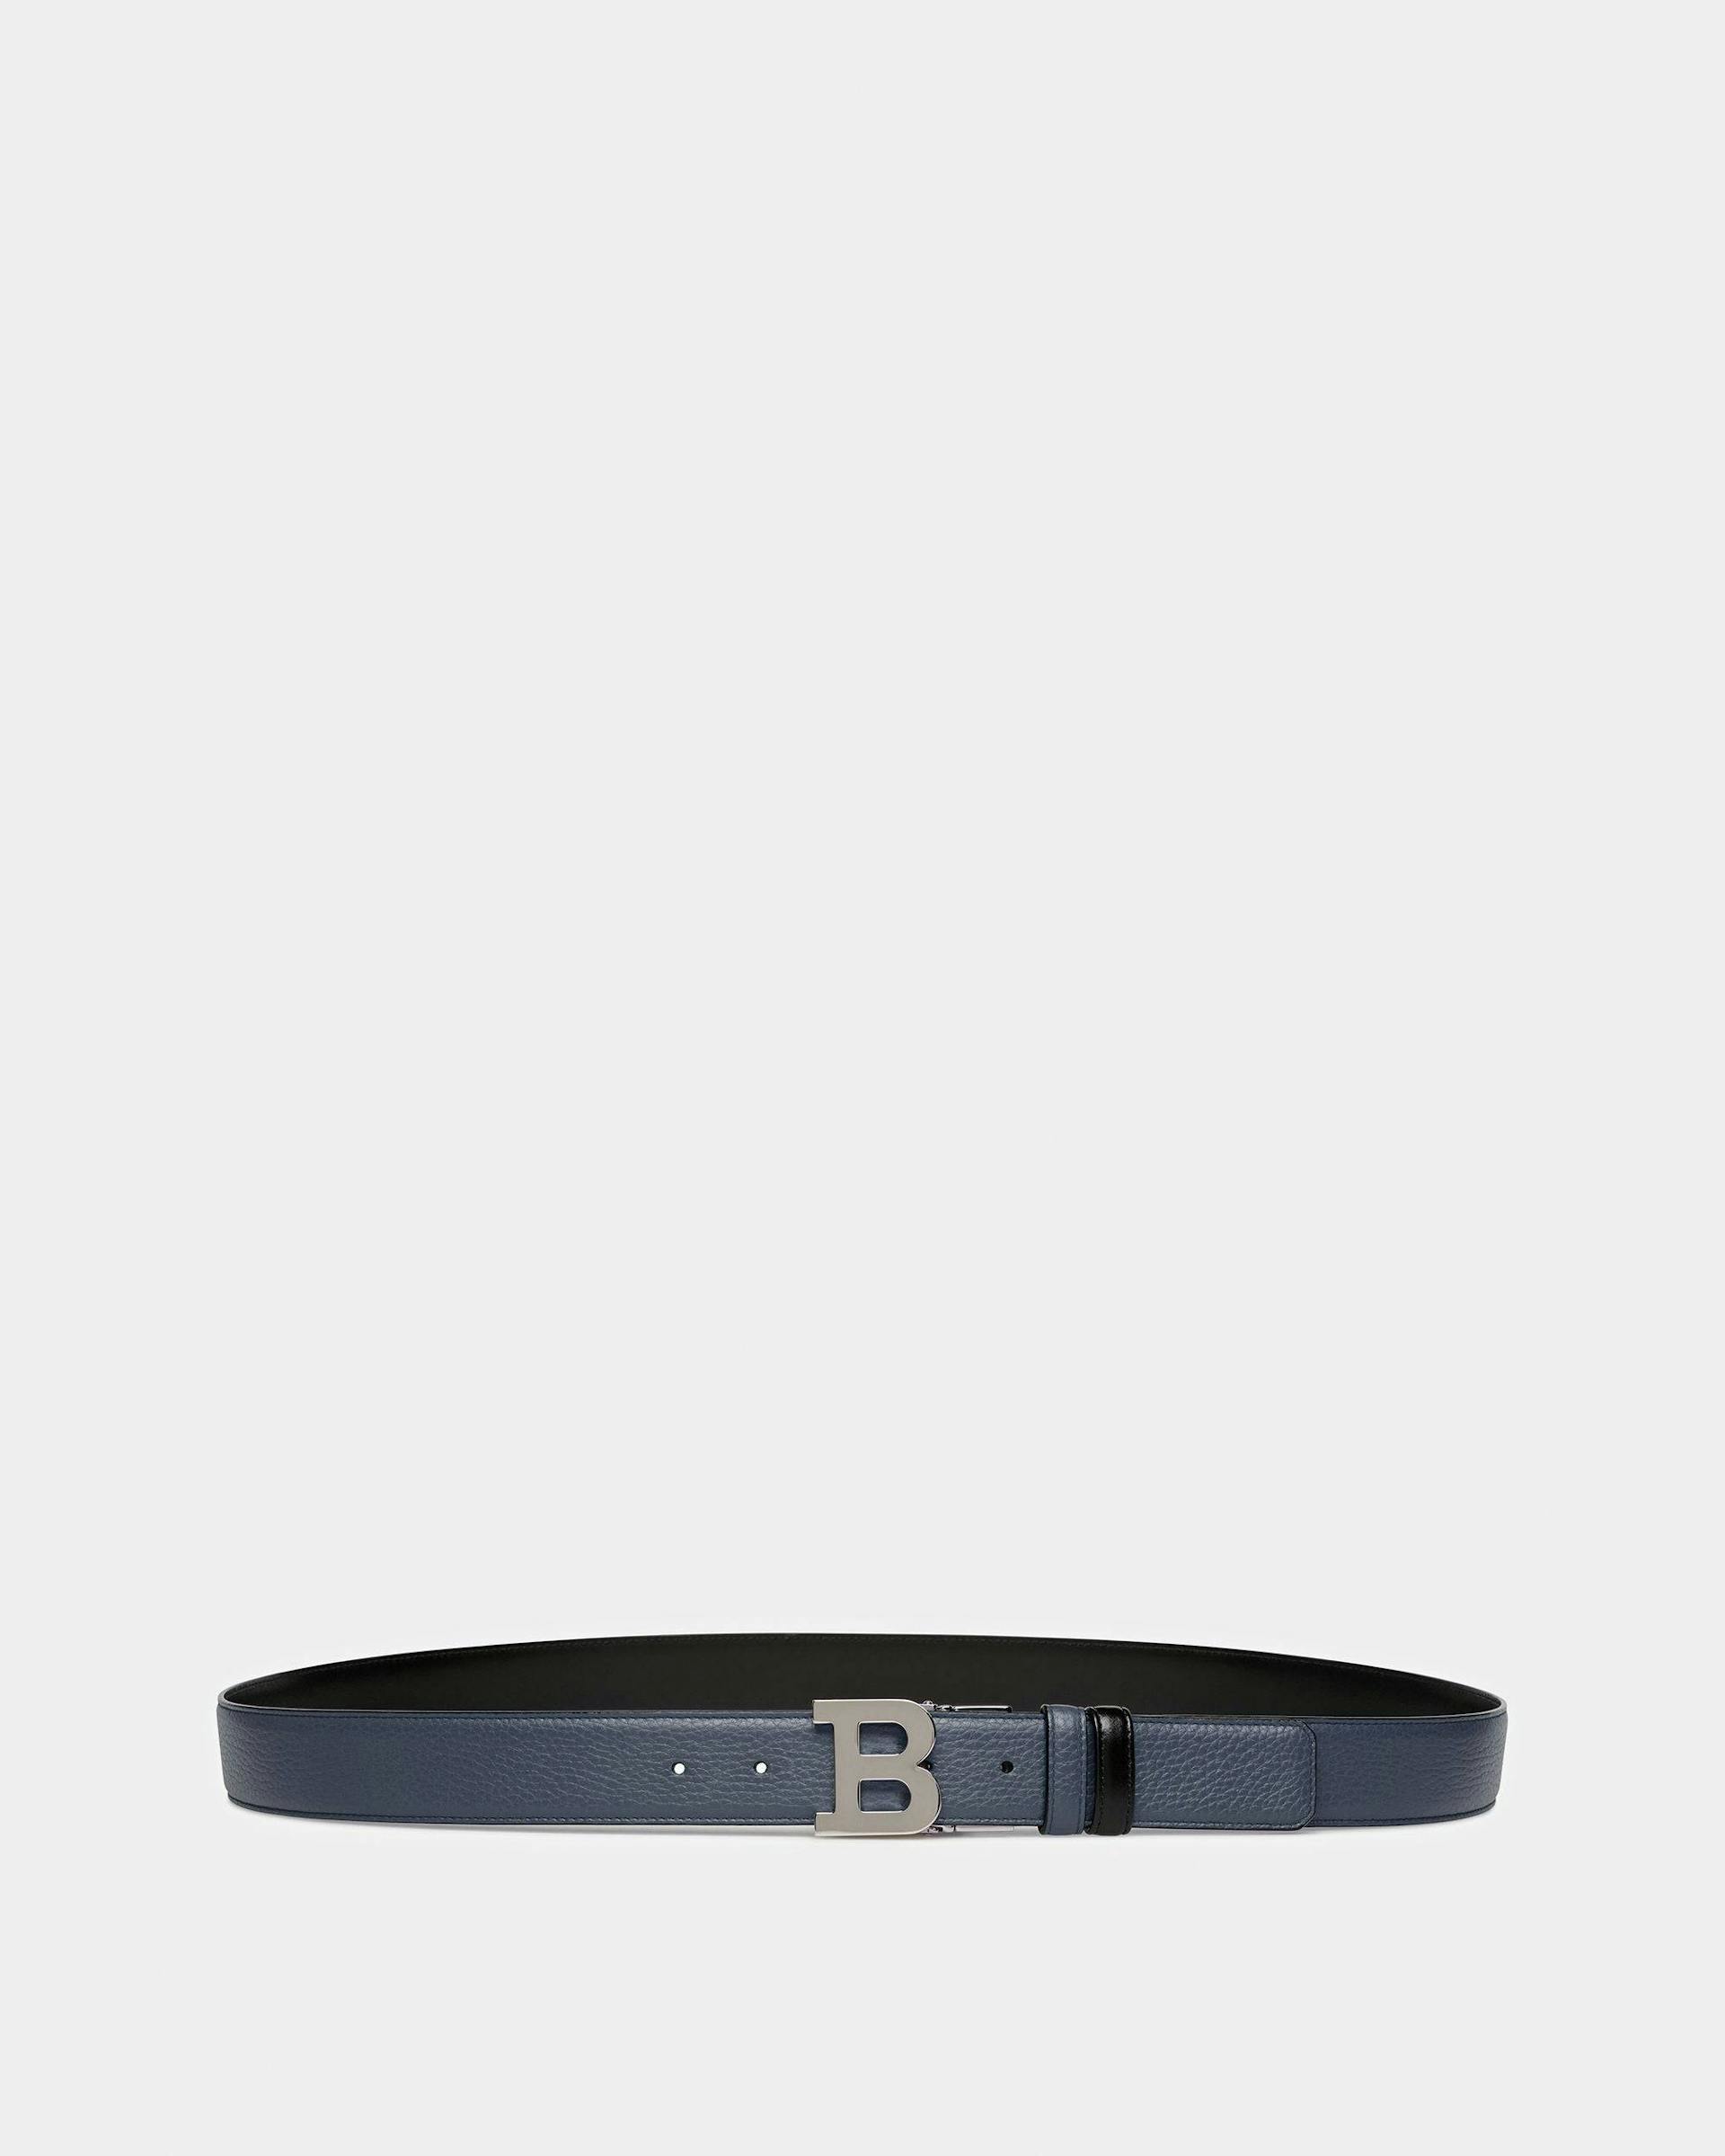 B Buckle Leather Belt In Midnight Blue And Black - Men's - Bally - 01